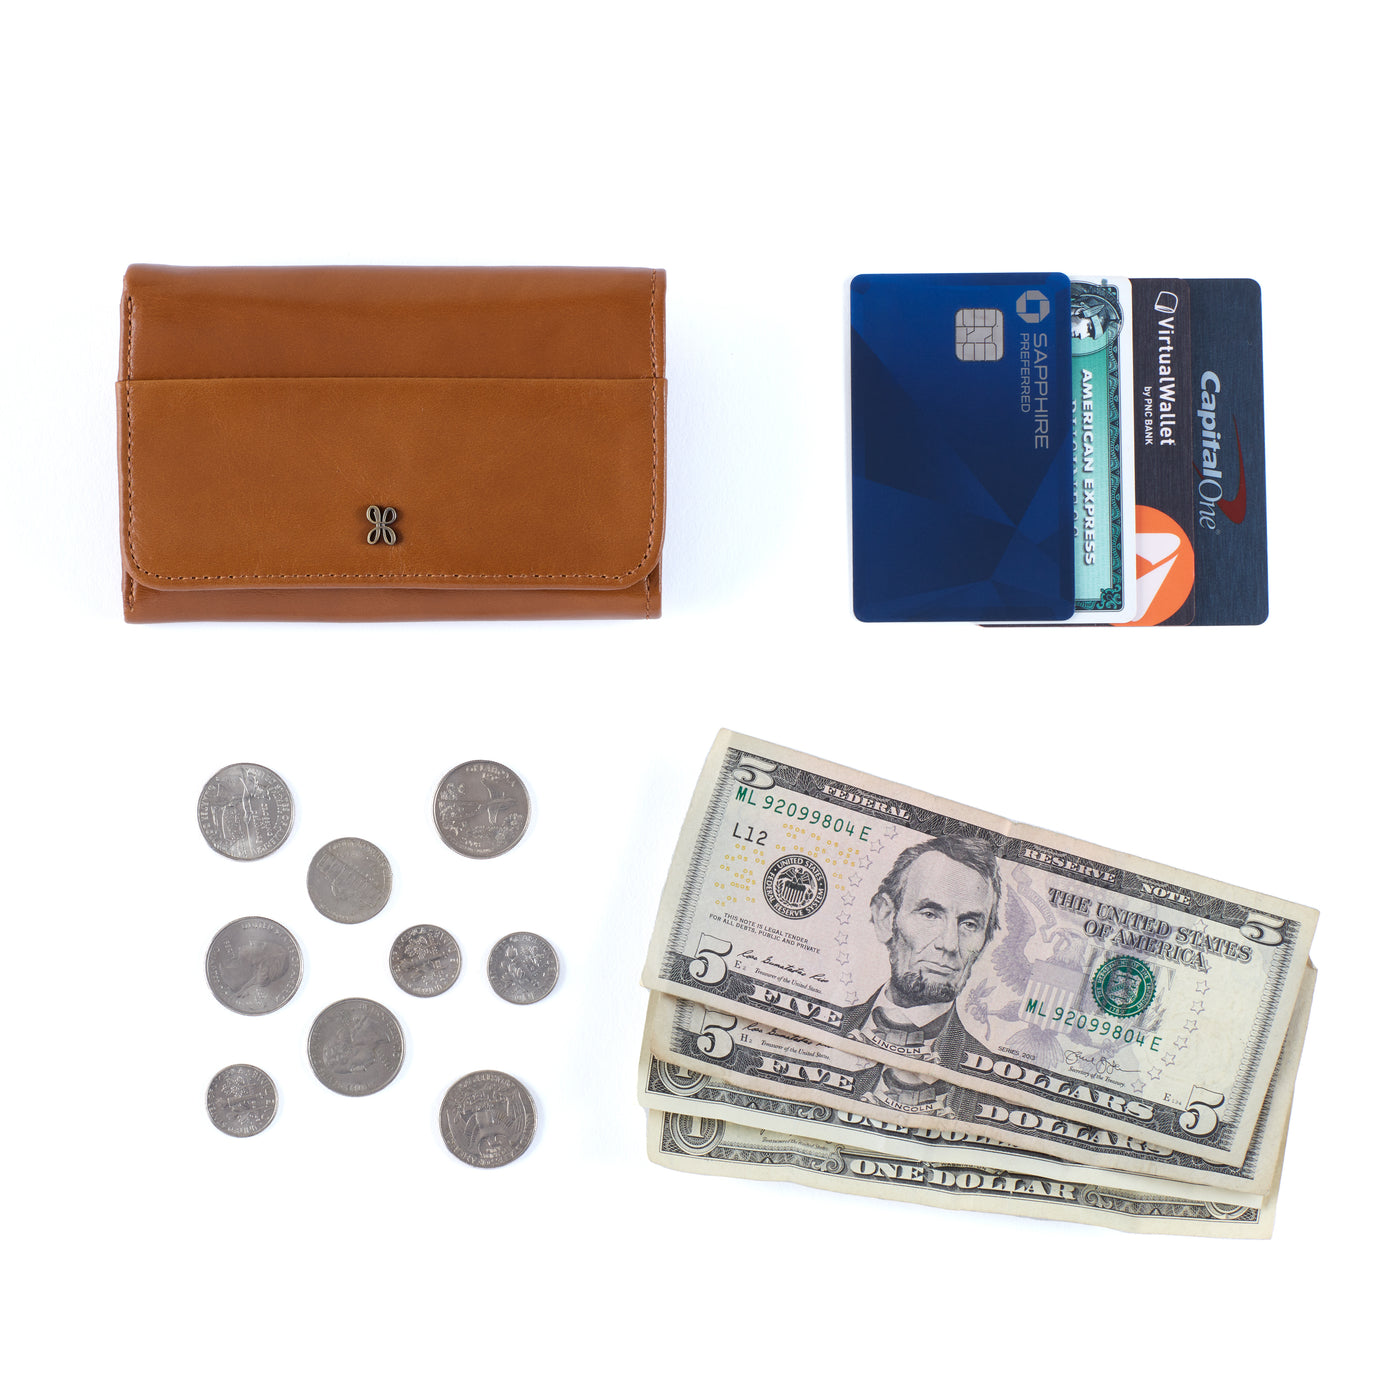 Jill Trifold Wallet in Polished Leather - Seaglass